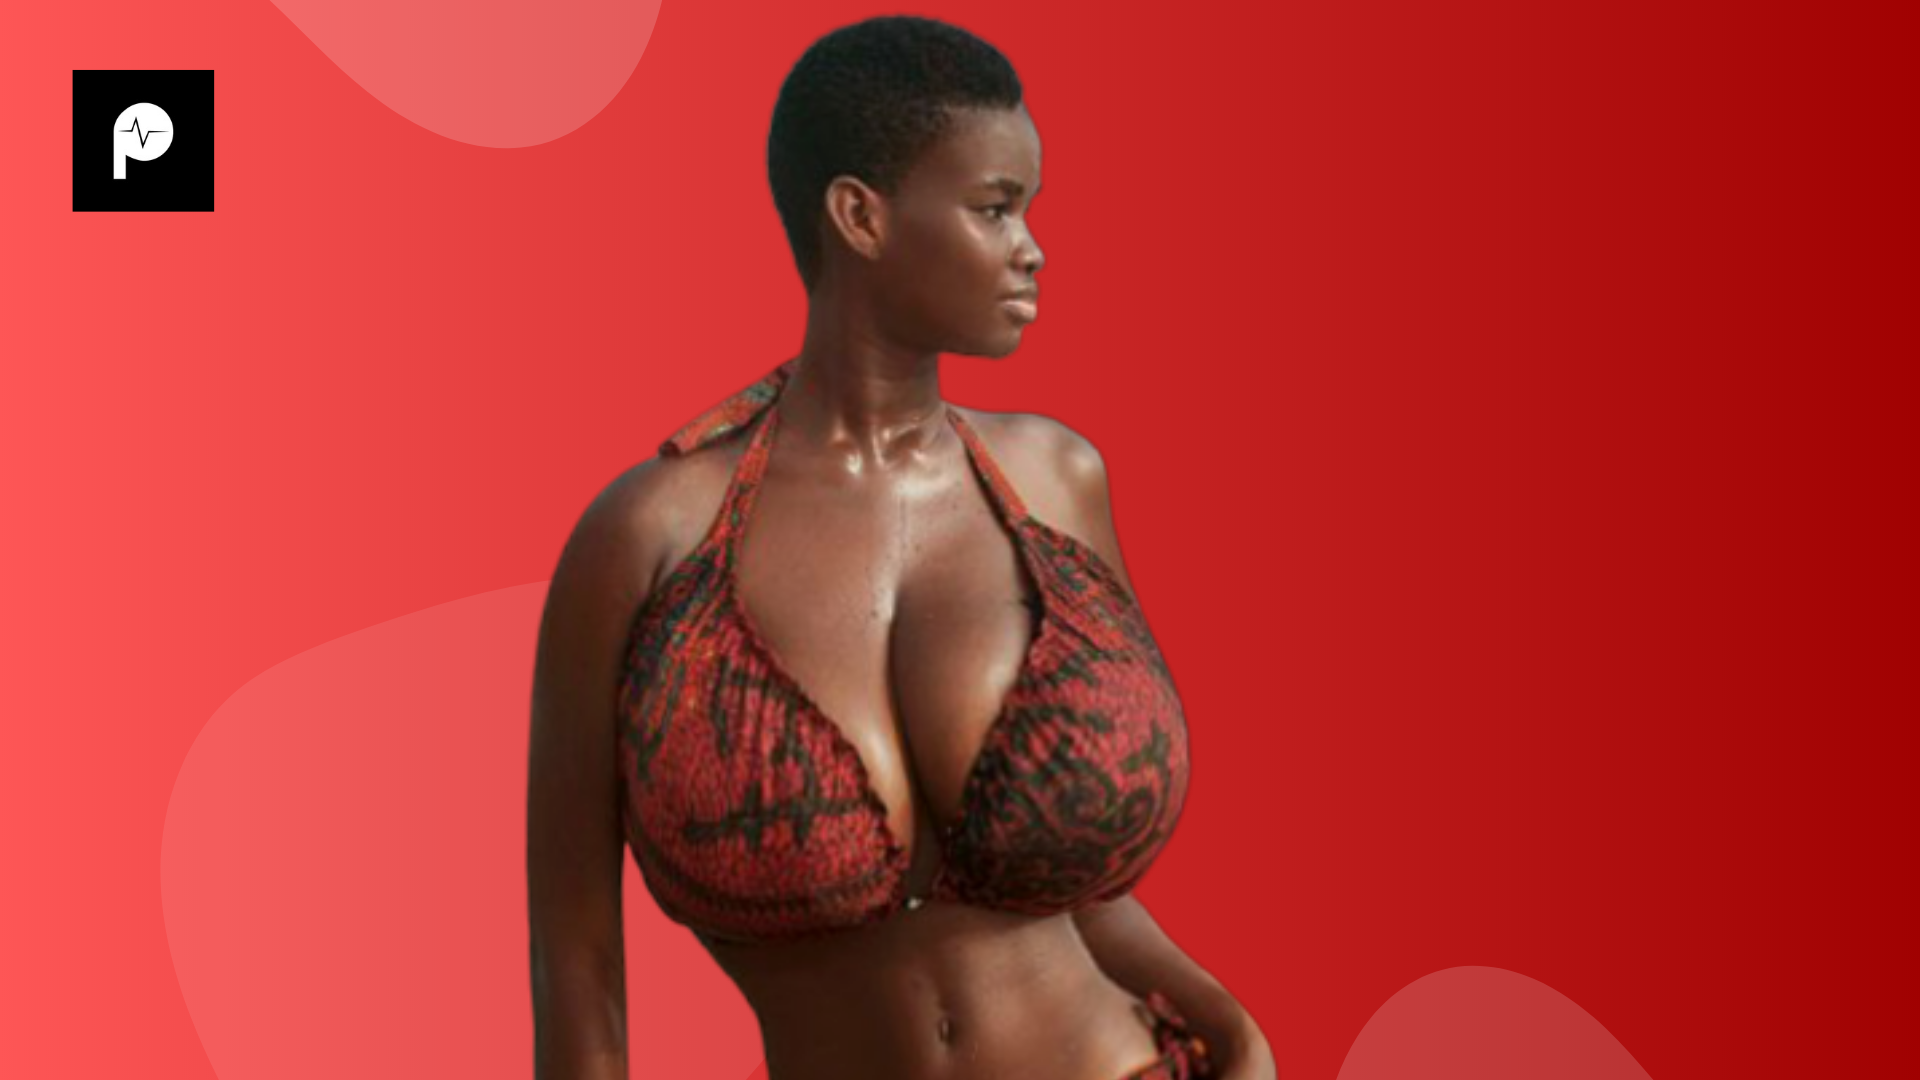 Here are 5 must-have back pain relief tips for women with big breasts